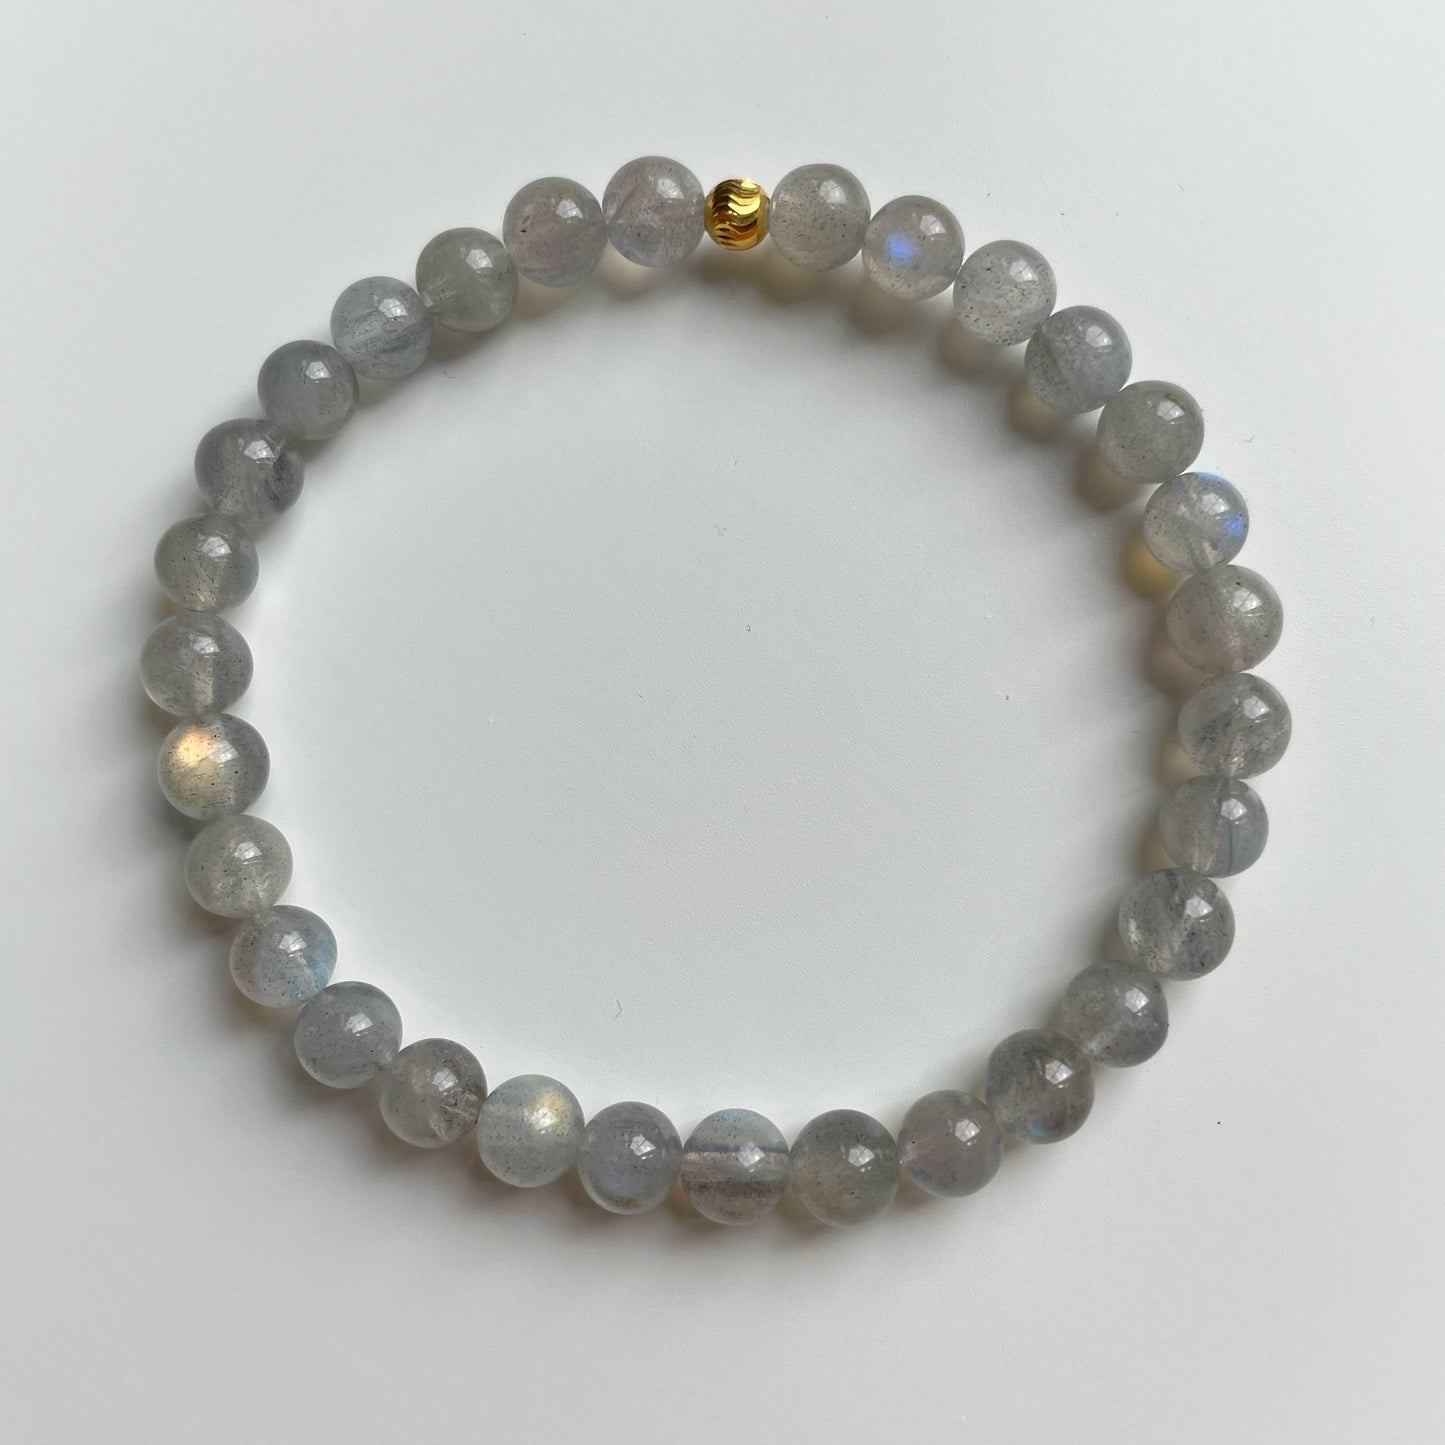 Full Moon - Labradorite bracelet for magic and protection